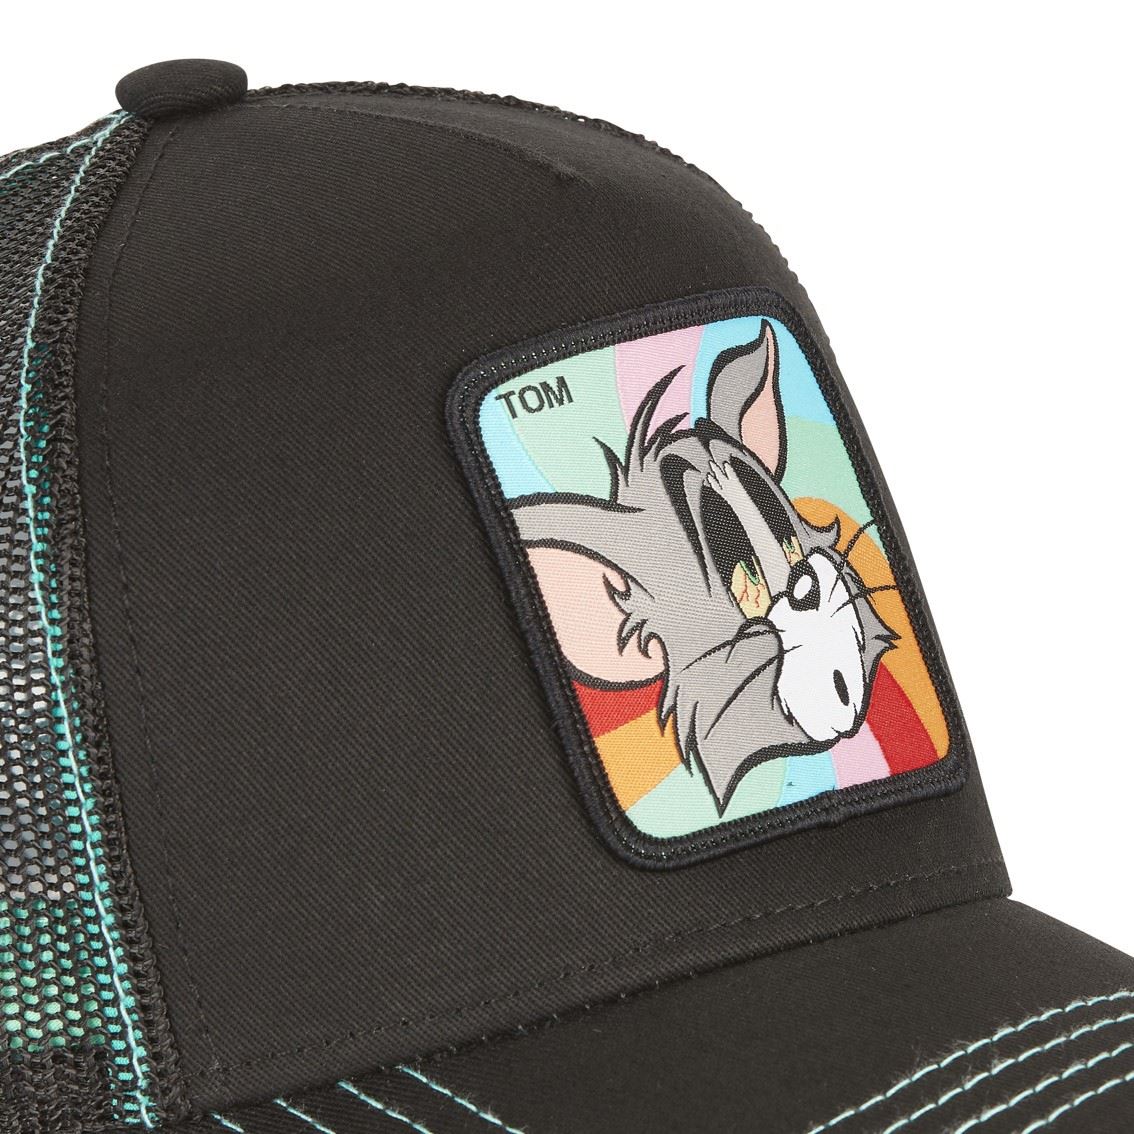 Tom Black Turquoise Tom and Jerry Trucker Cap Capslab